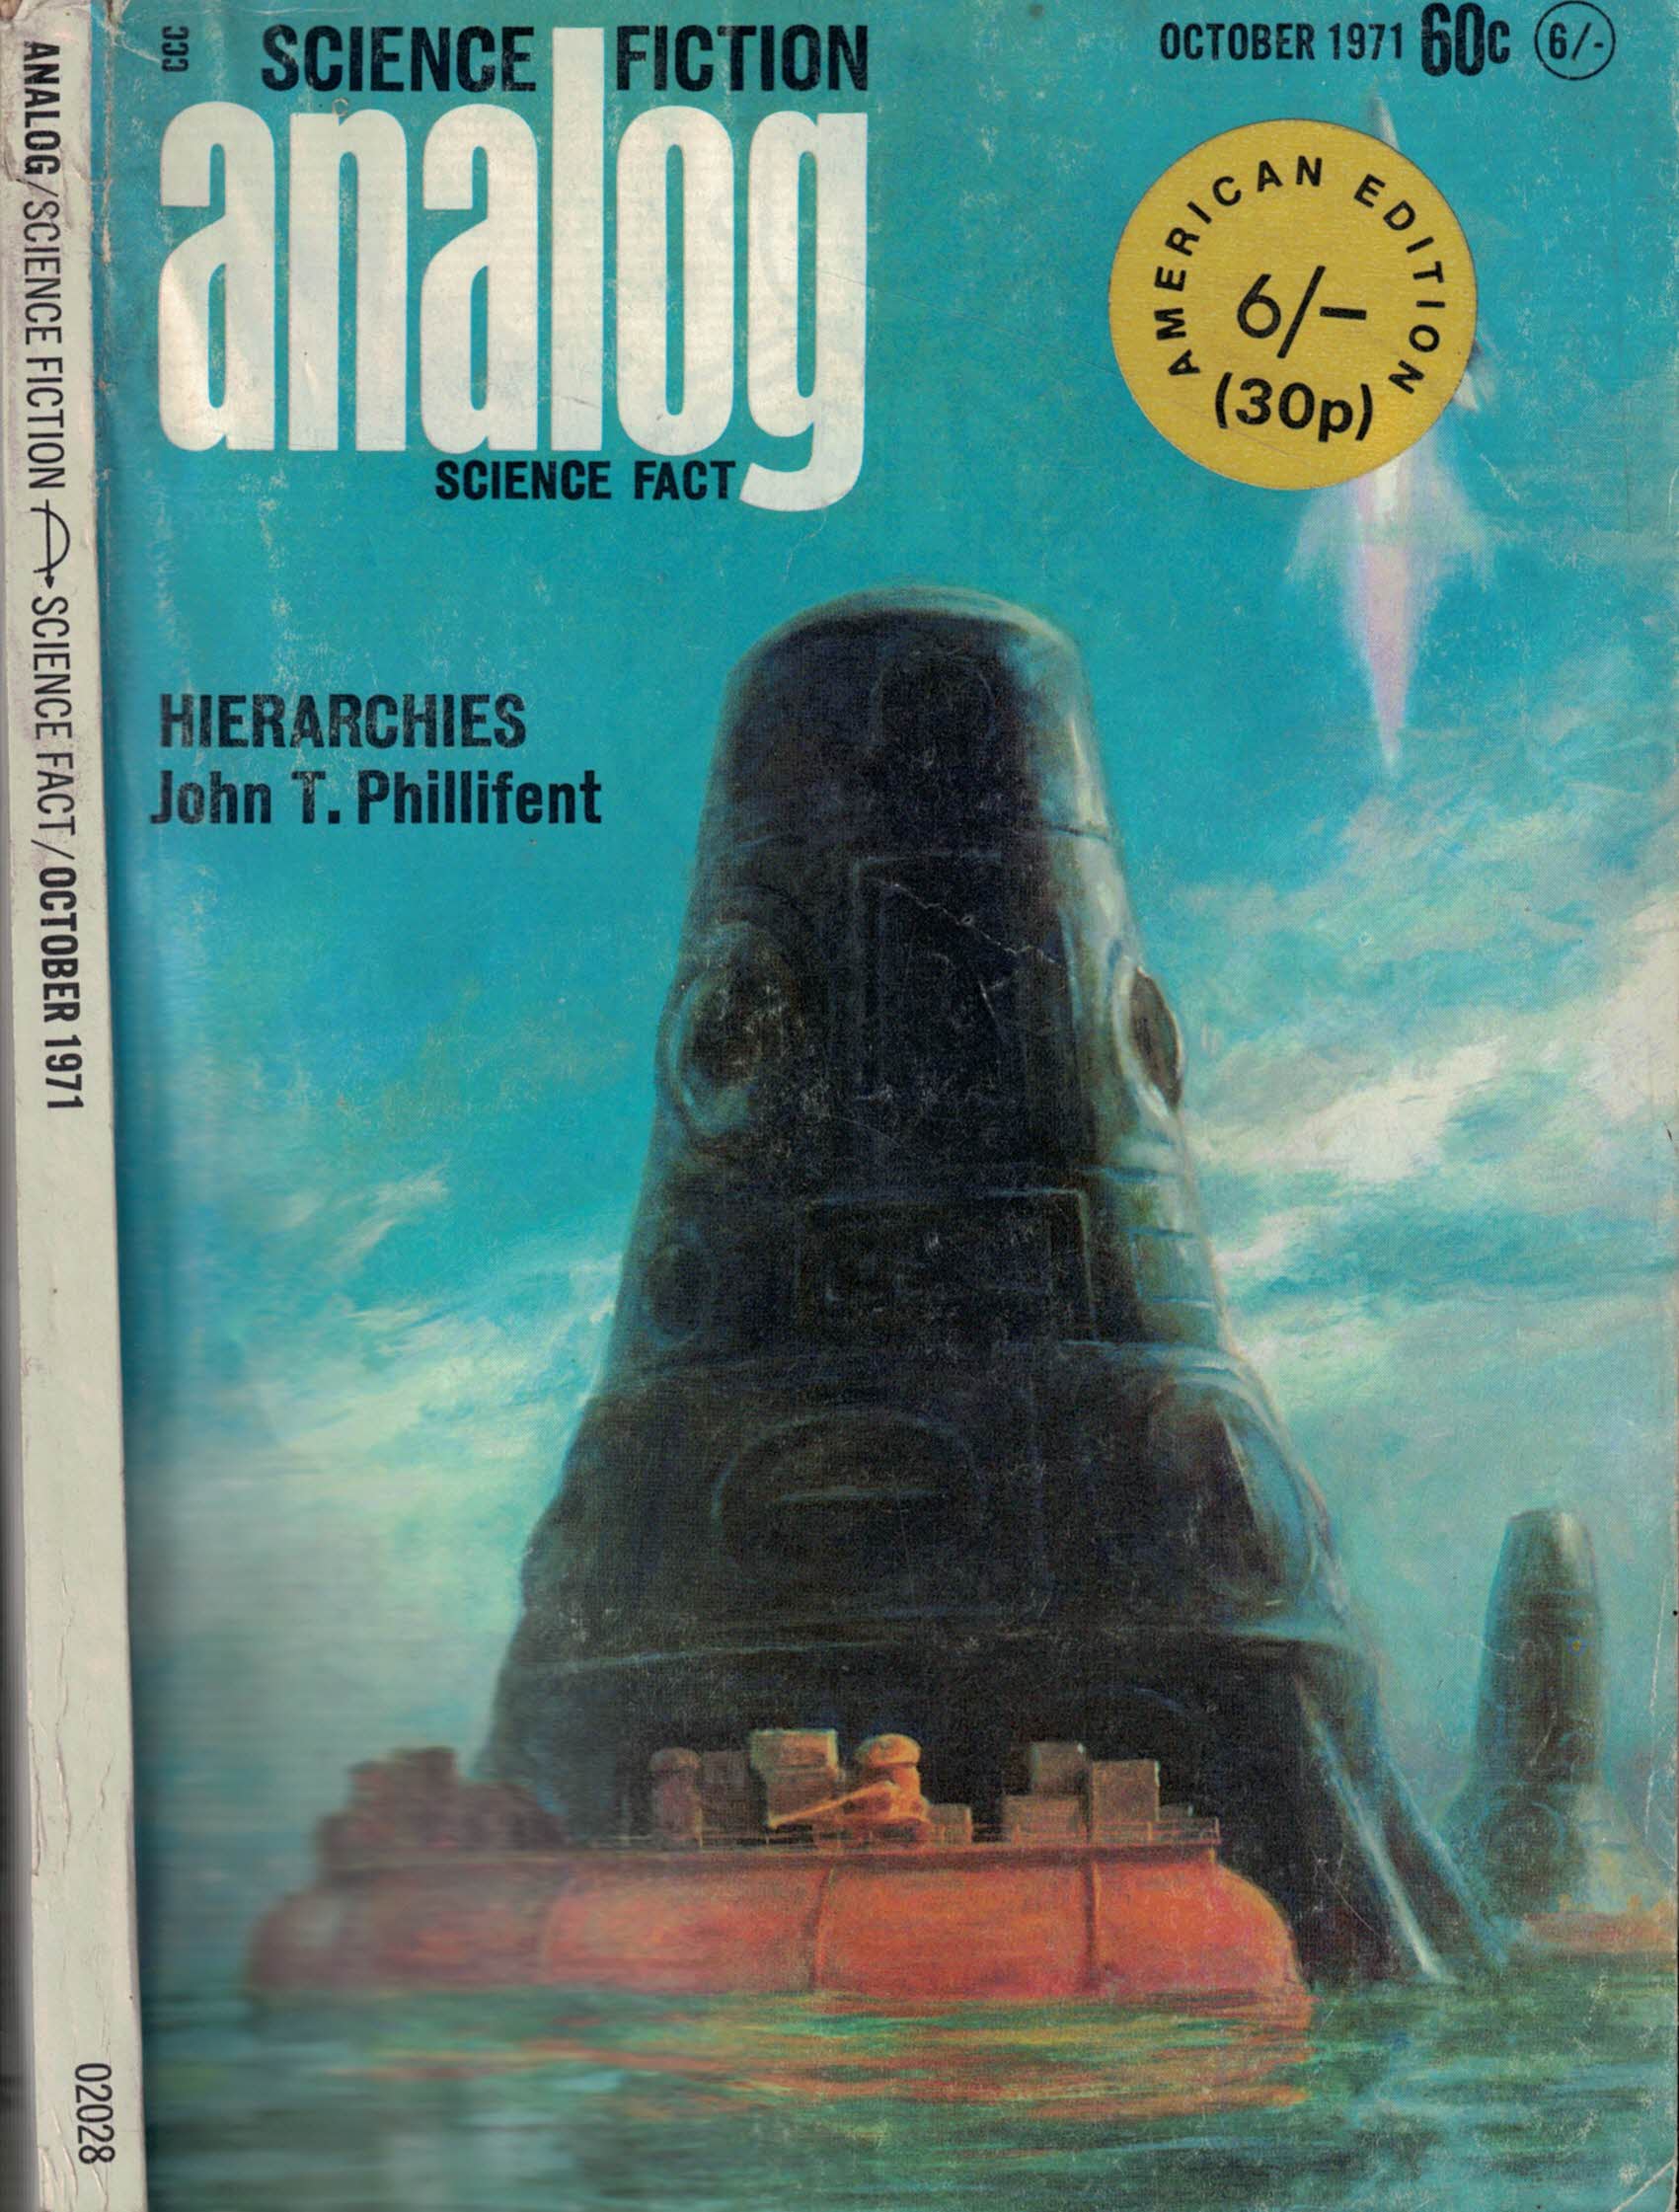 Analog. Science Fiction and Fact. Volume 88, Number 2. October 1971.